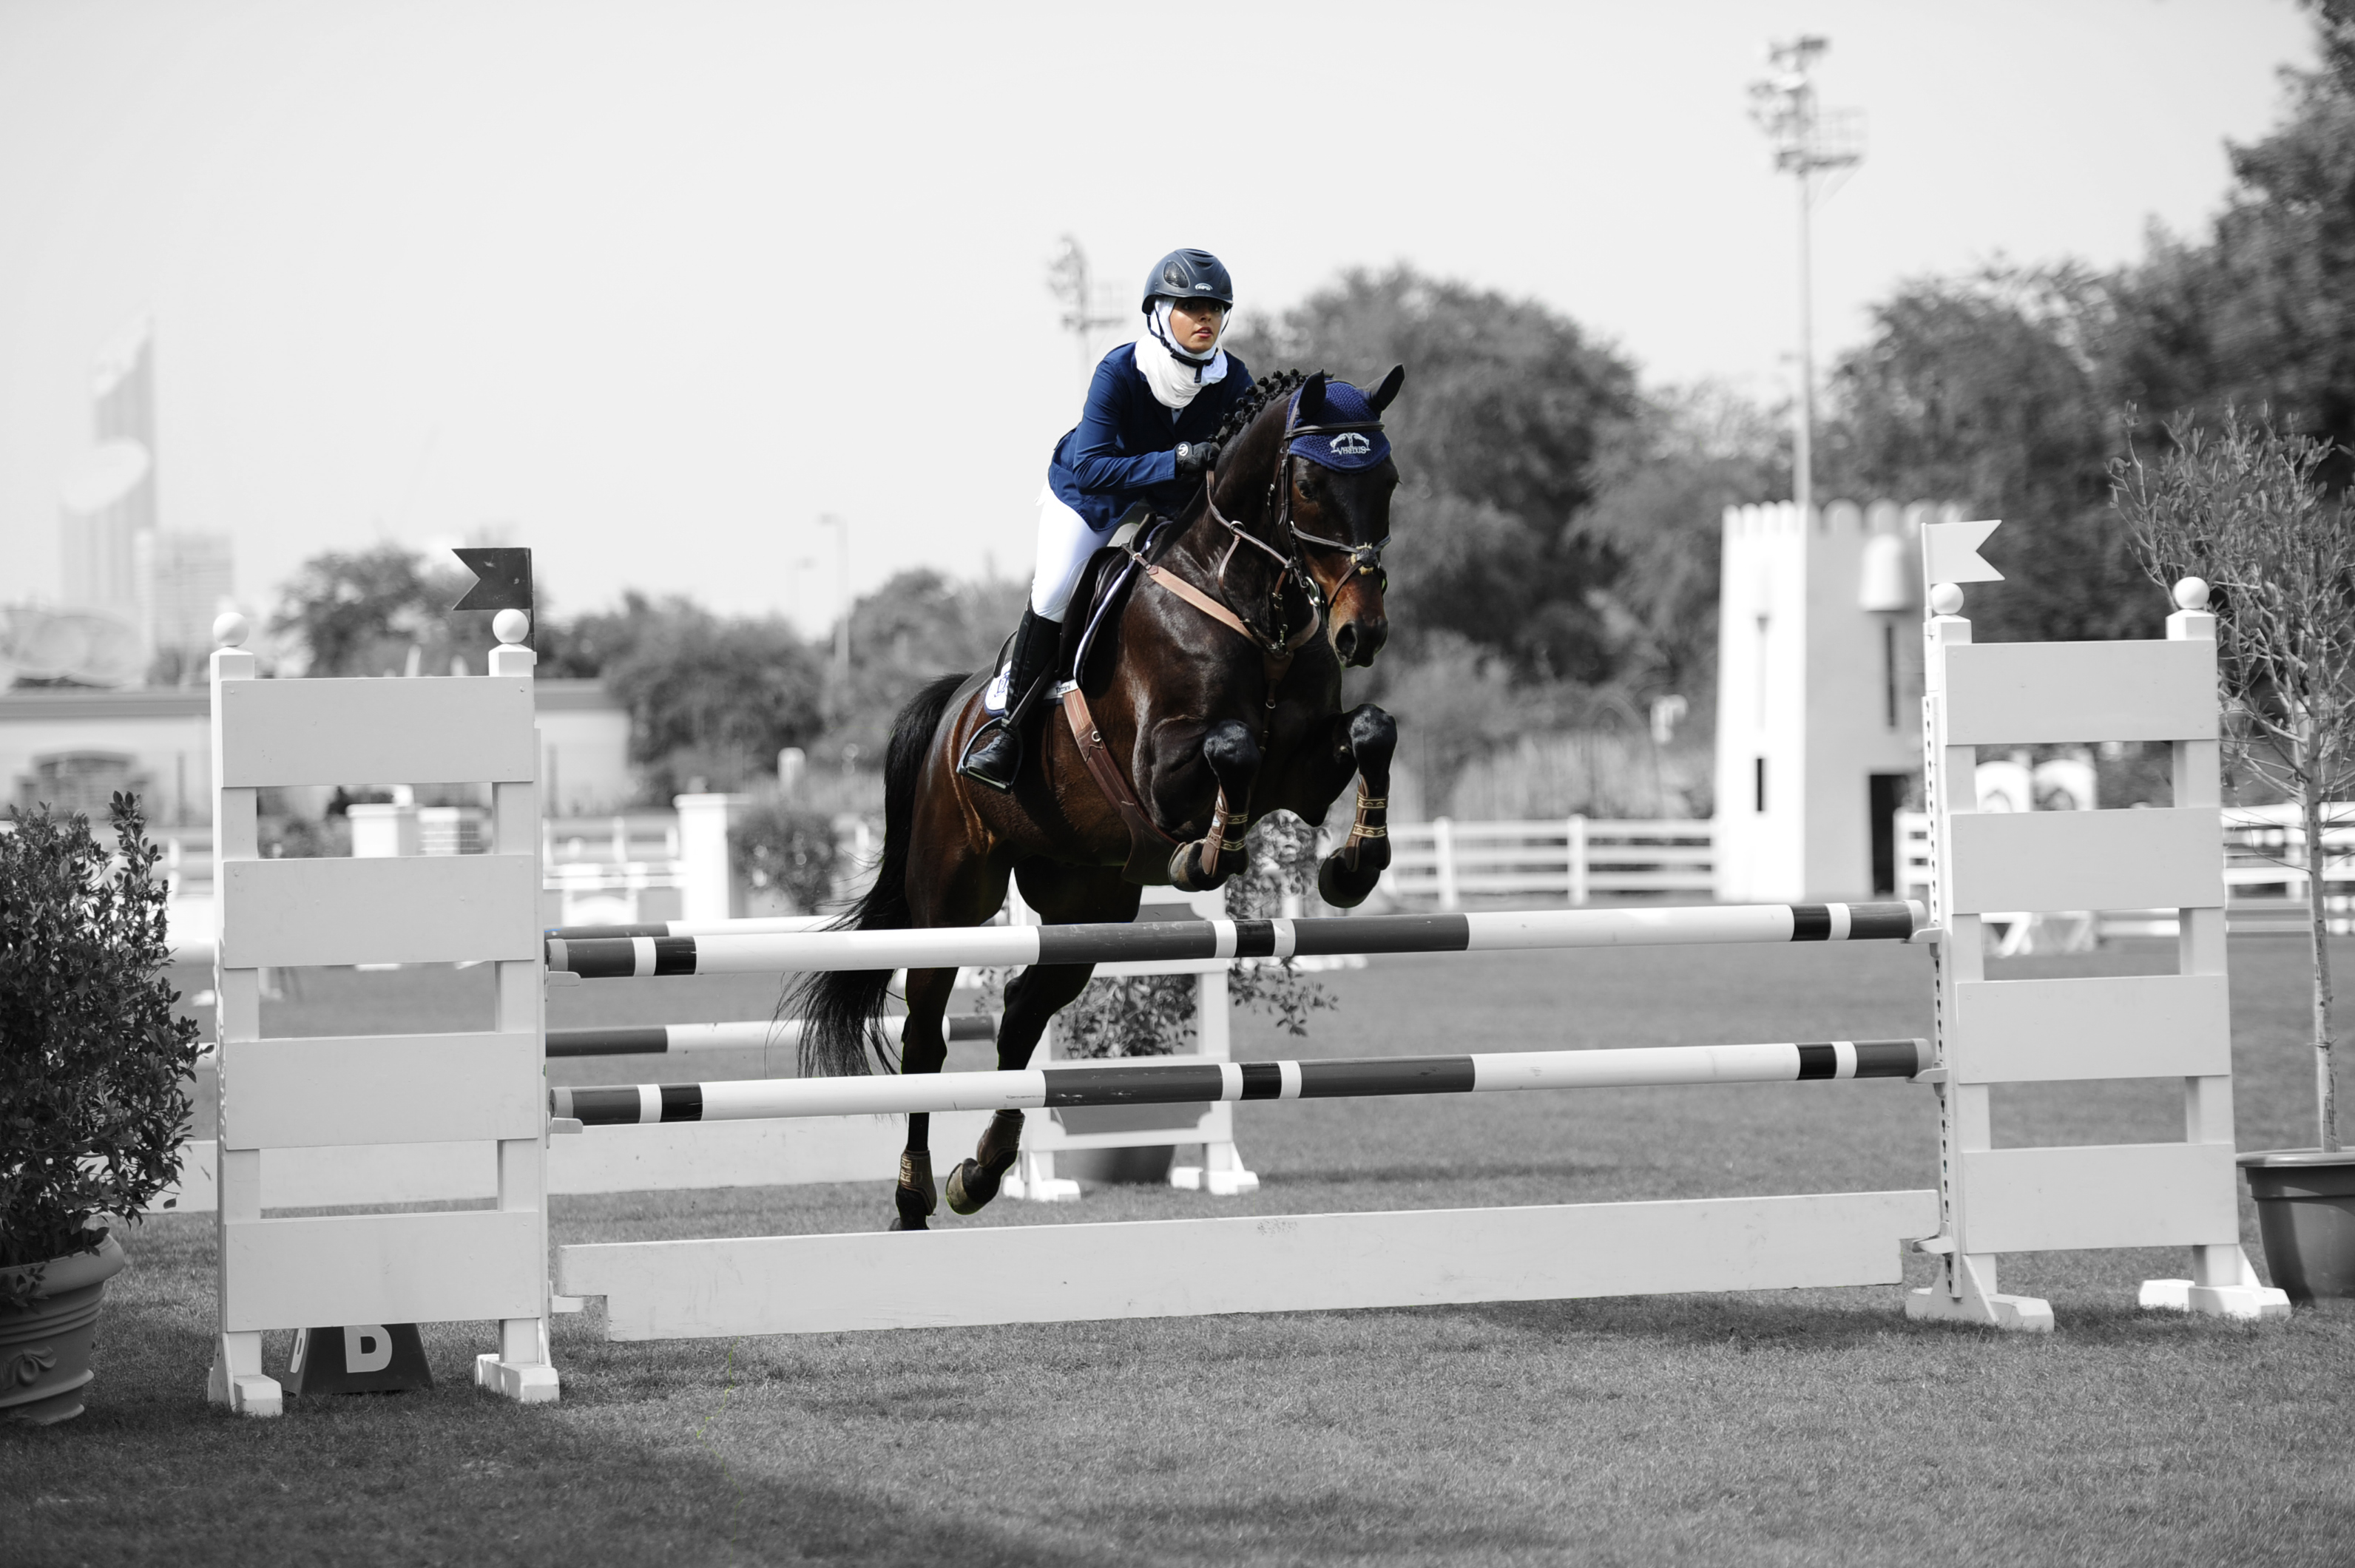 7TH FBMA INTERNATIONAL SHOW JUMPING CUP